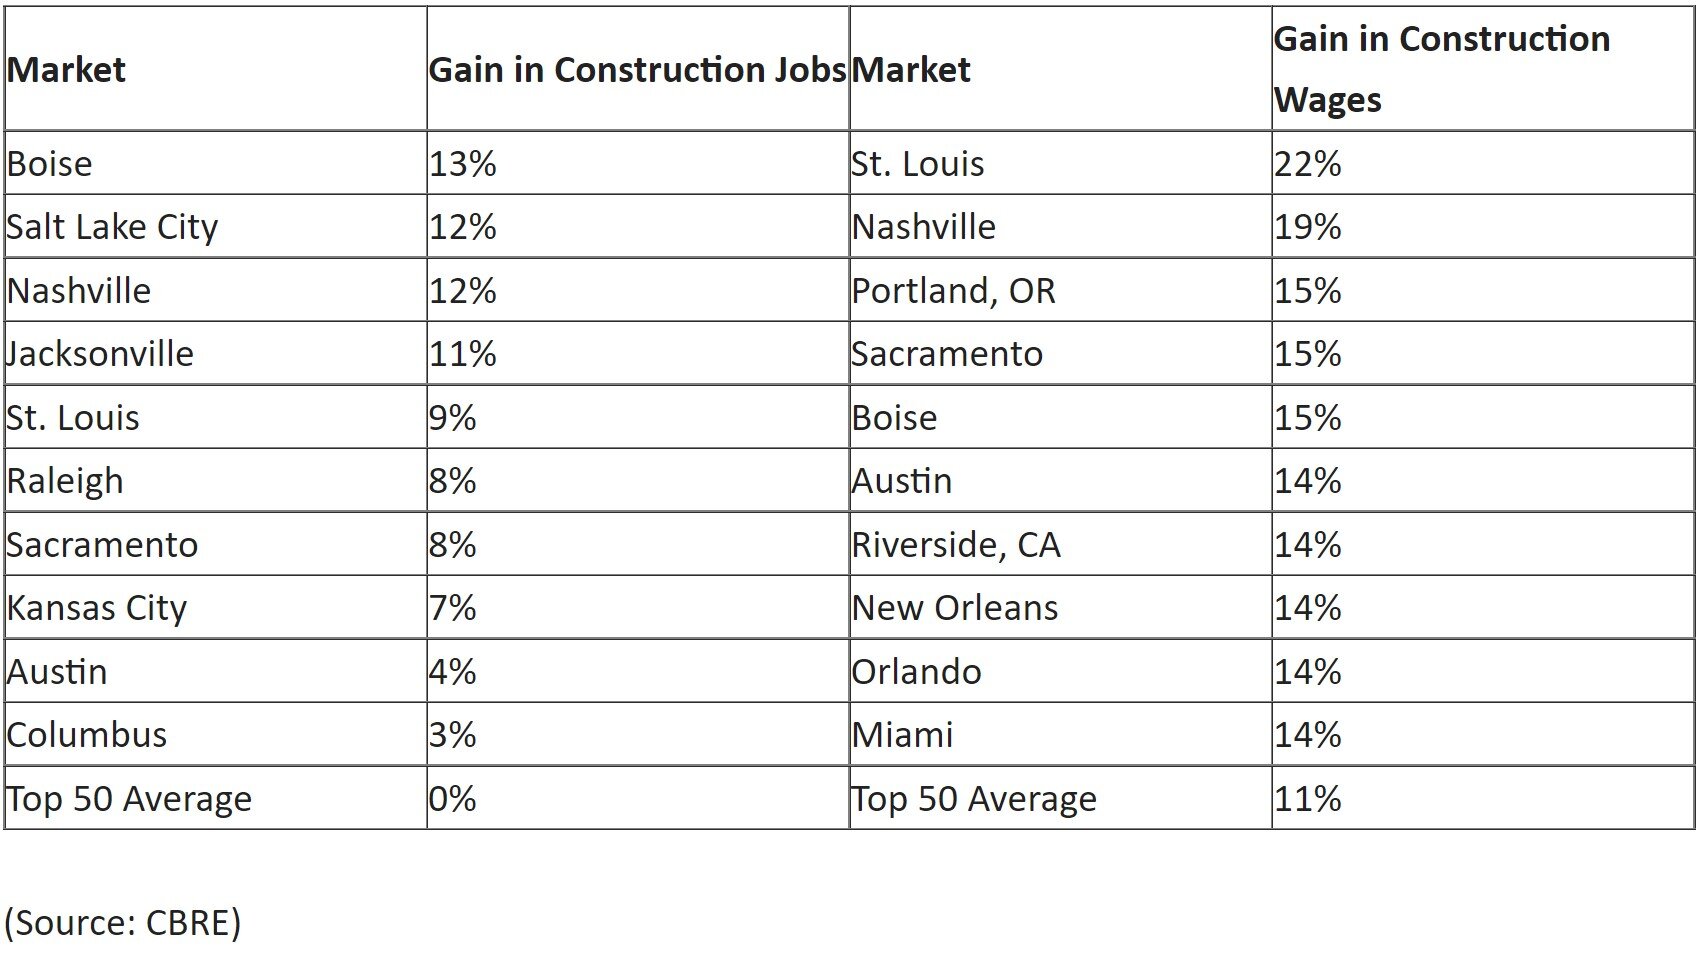 https://www.worldpropertyjournal.com/news-assets-2/Top%2010%20US%20Markets%20For%20Gains%20in%20Construction%20Jobs%20and%20Wages.jpg